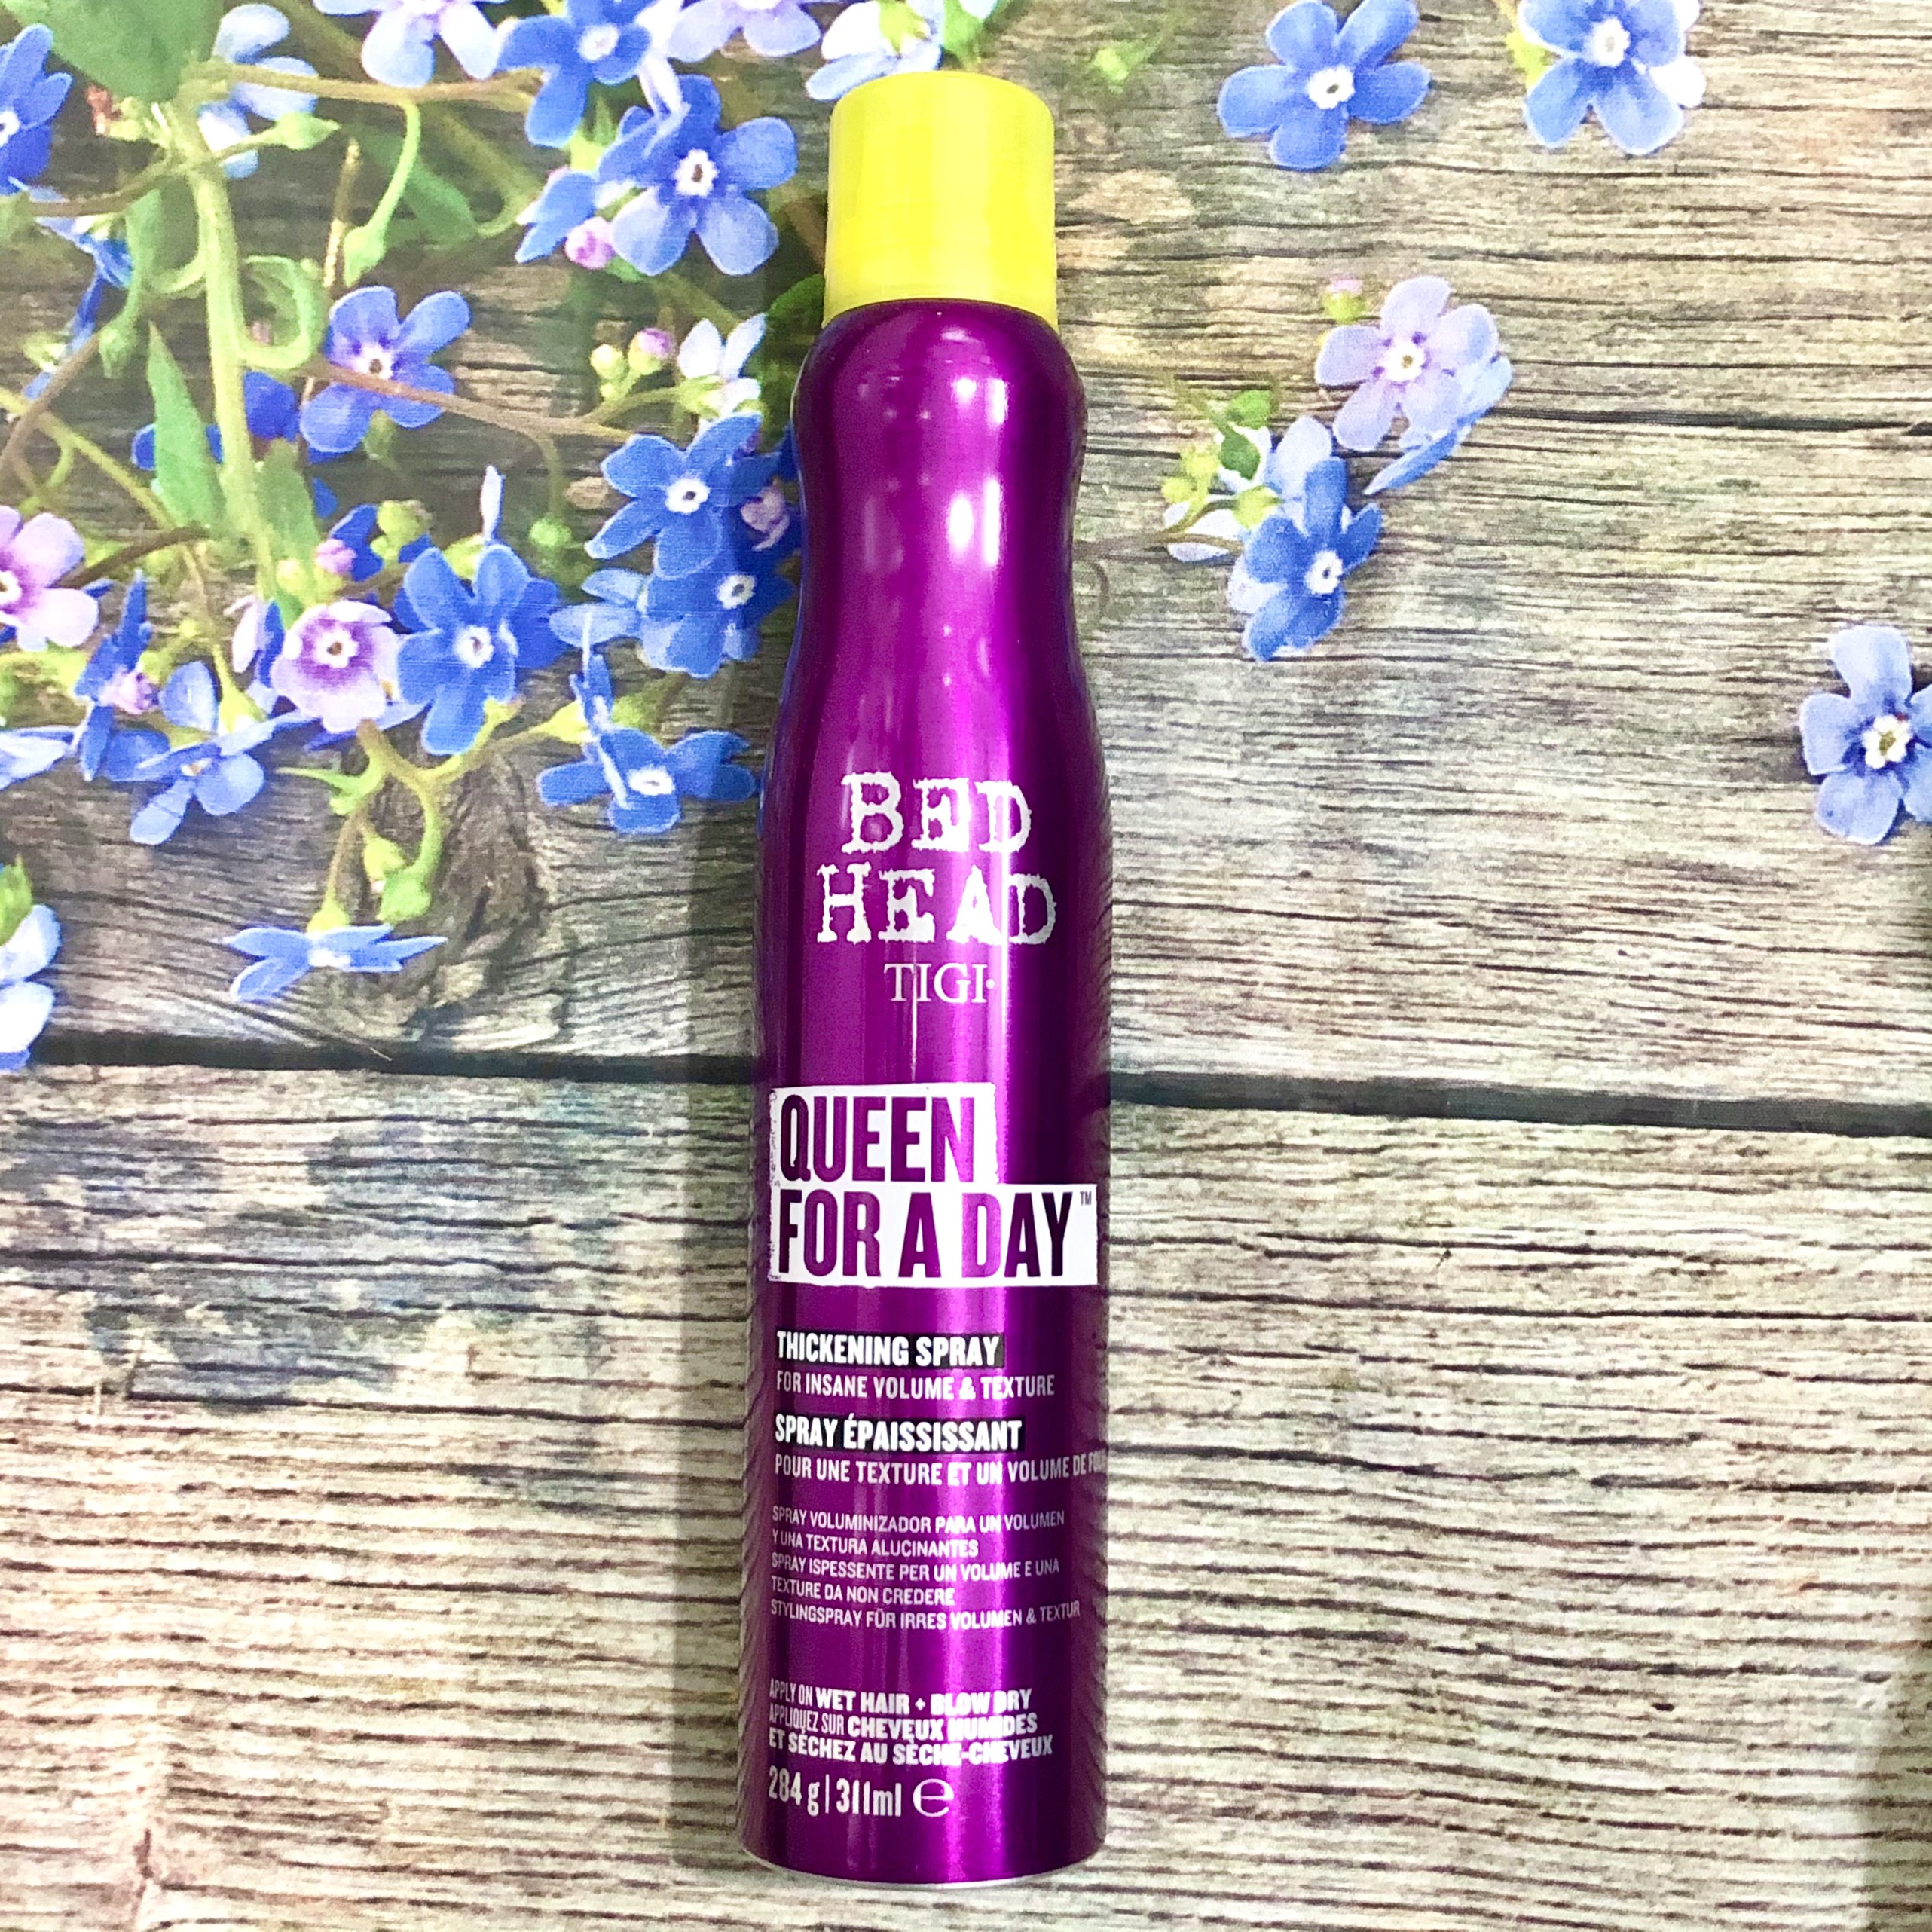 BED HEAD TIGI Superstar Queen for a Day hair thickening and volume spray